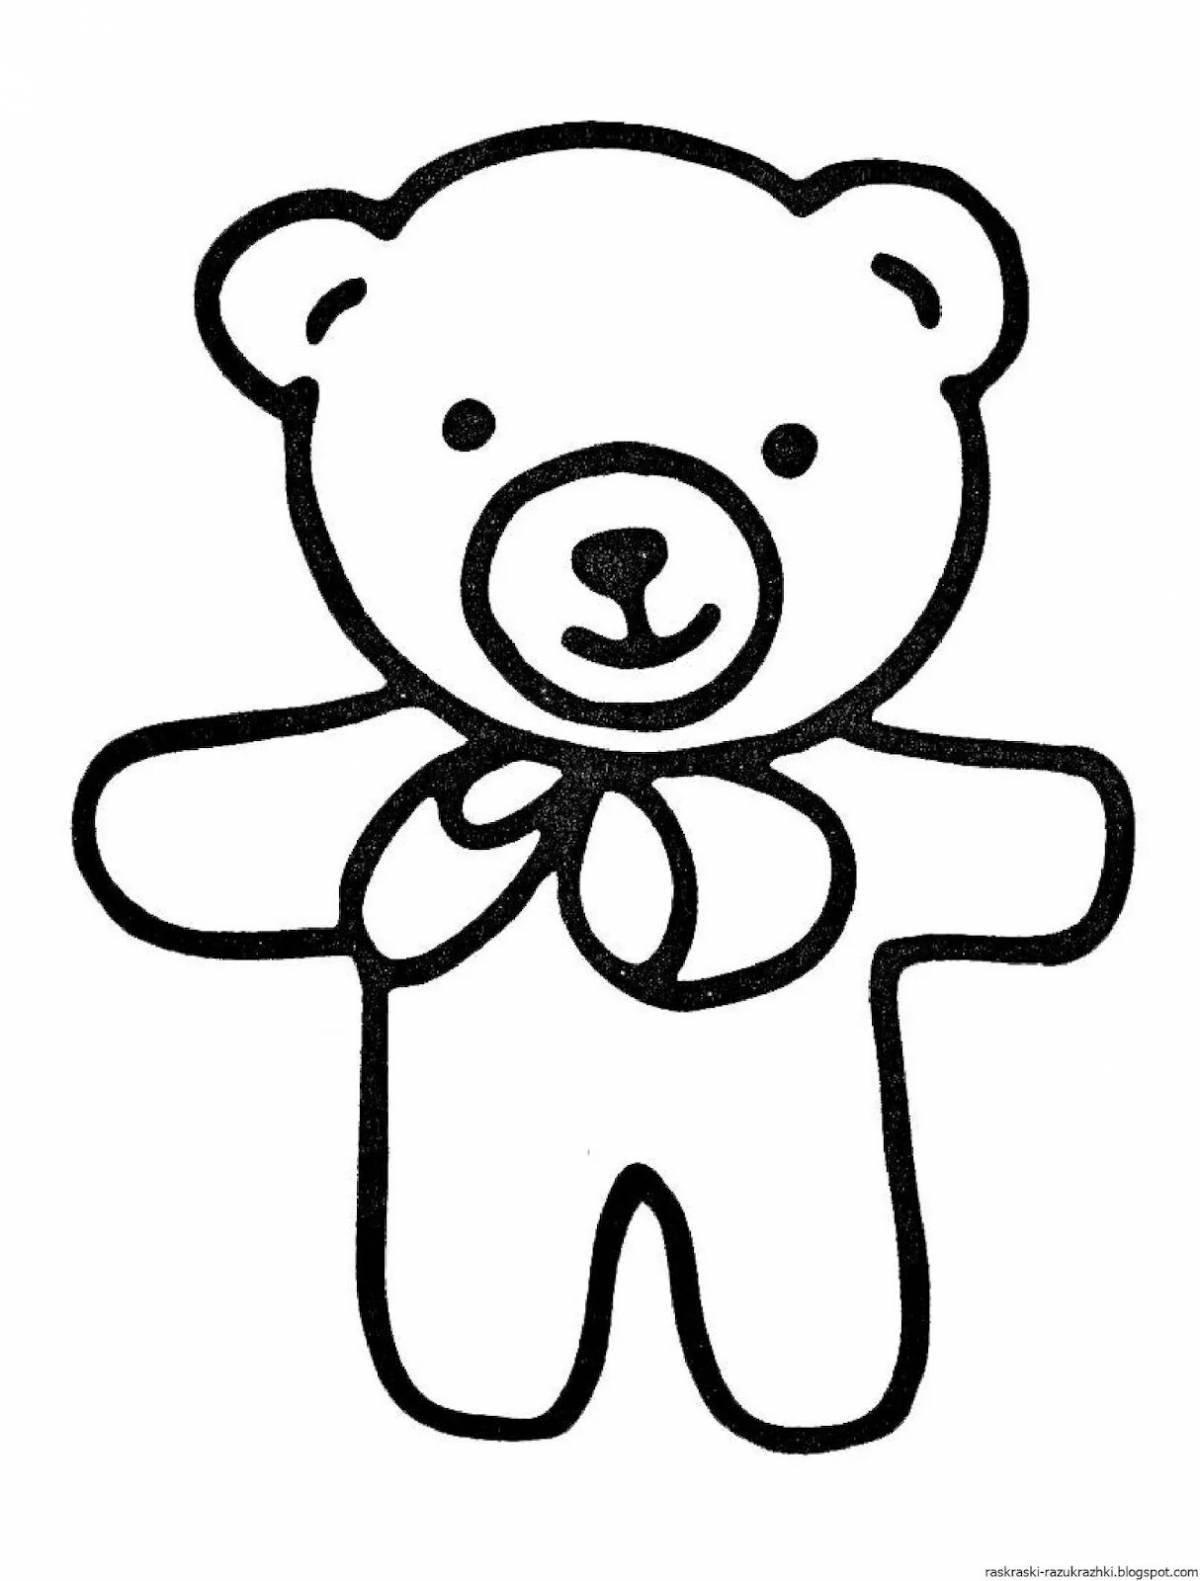 Curious bear coloring page